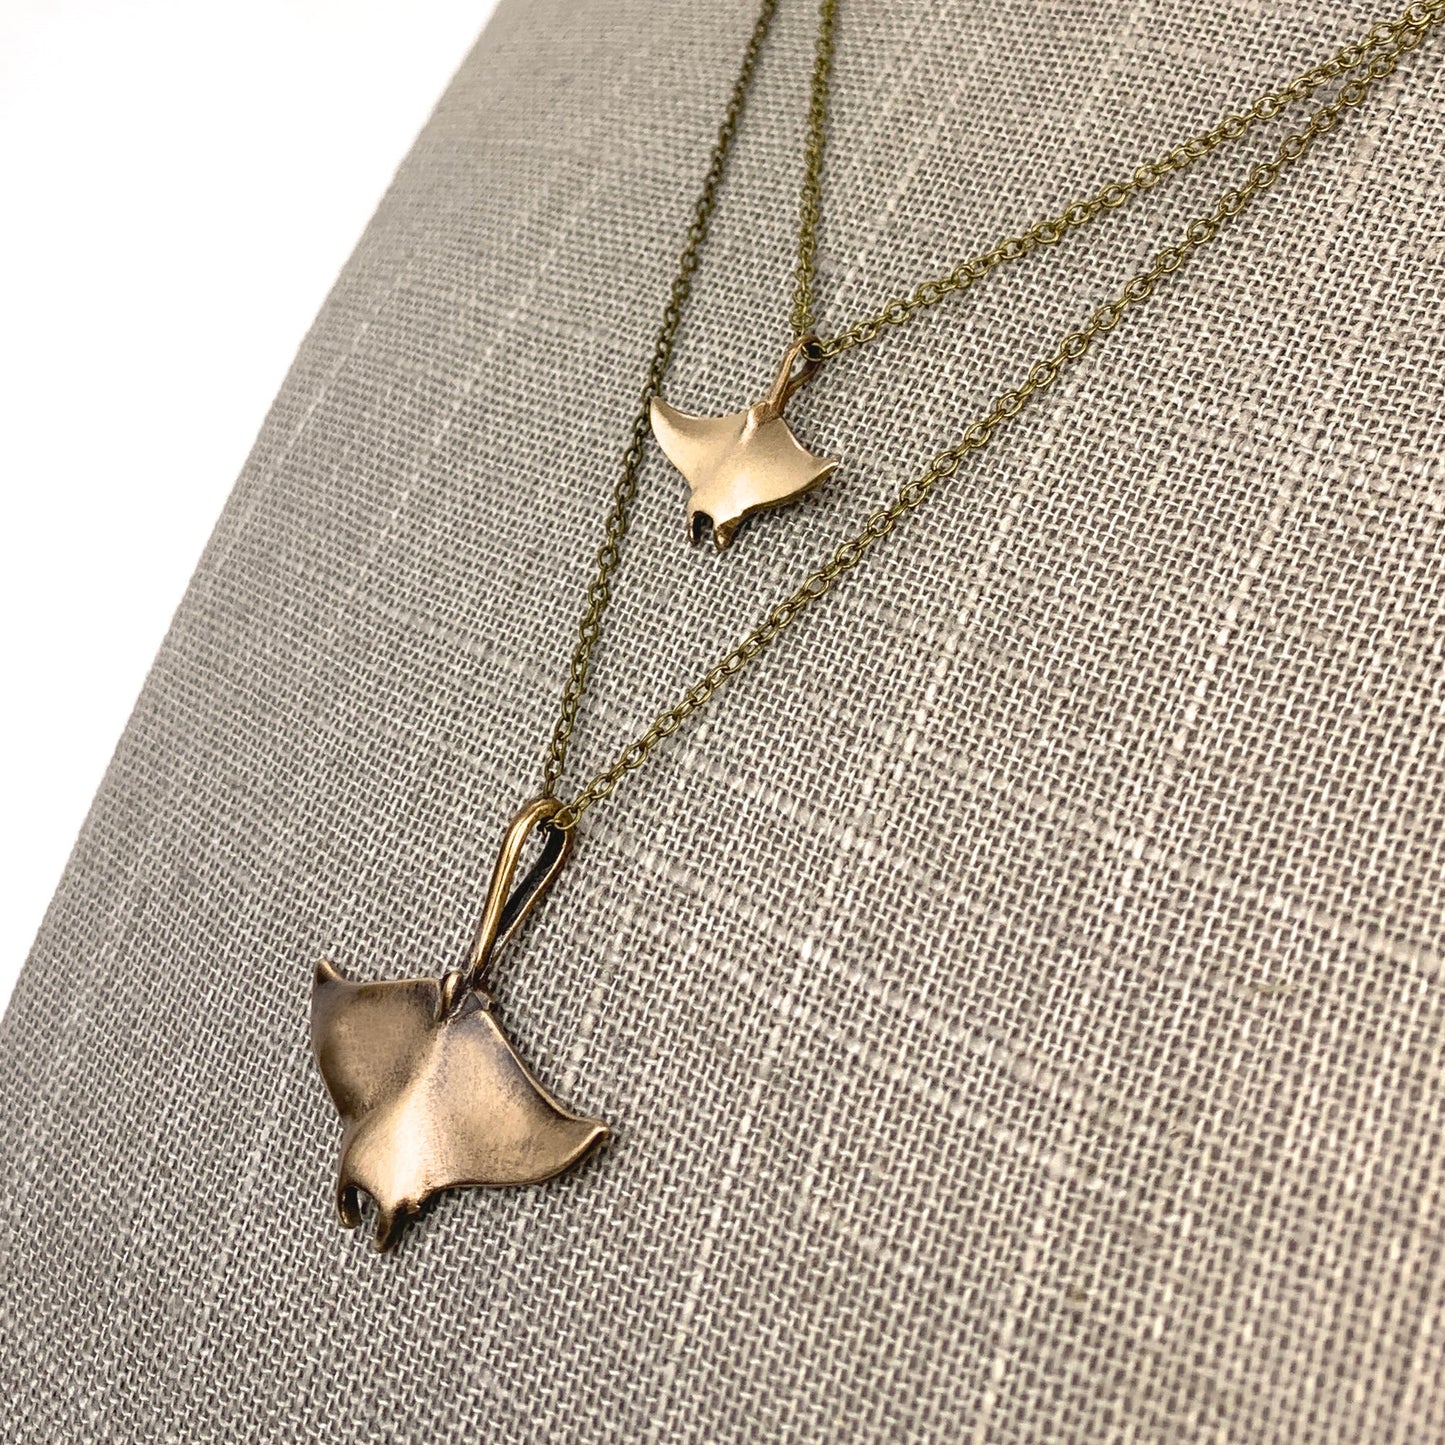 Boho Manta Ray Necklace for Women- Bronze Beachy Boho Necklace, Layered Manta Ray Necklace, Sea Life Gifts, Bronze Stingray, Brown Manta Ray Necklace - The Tool Store